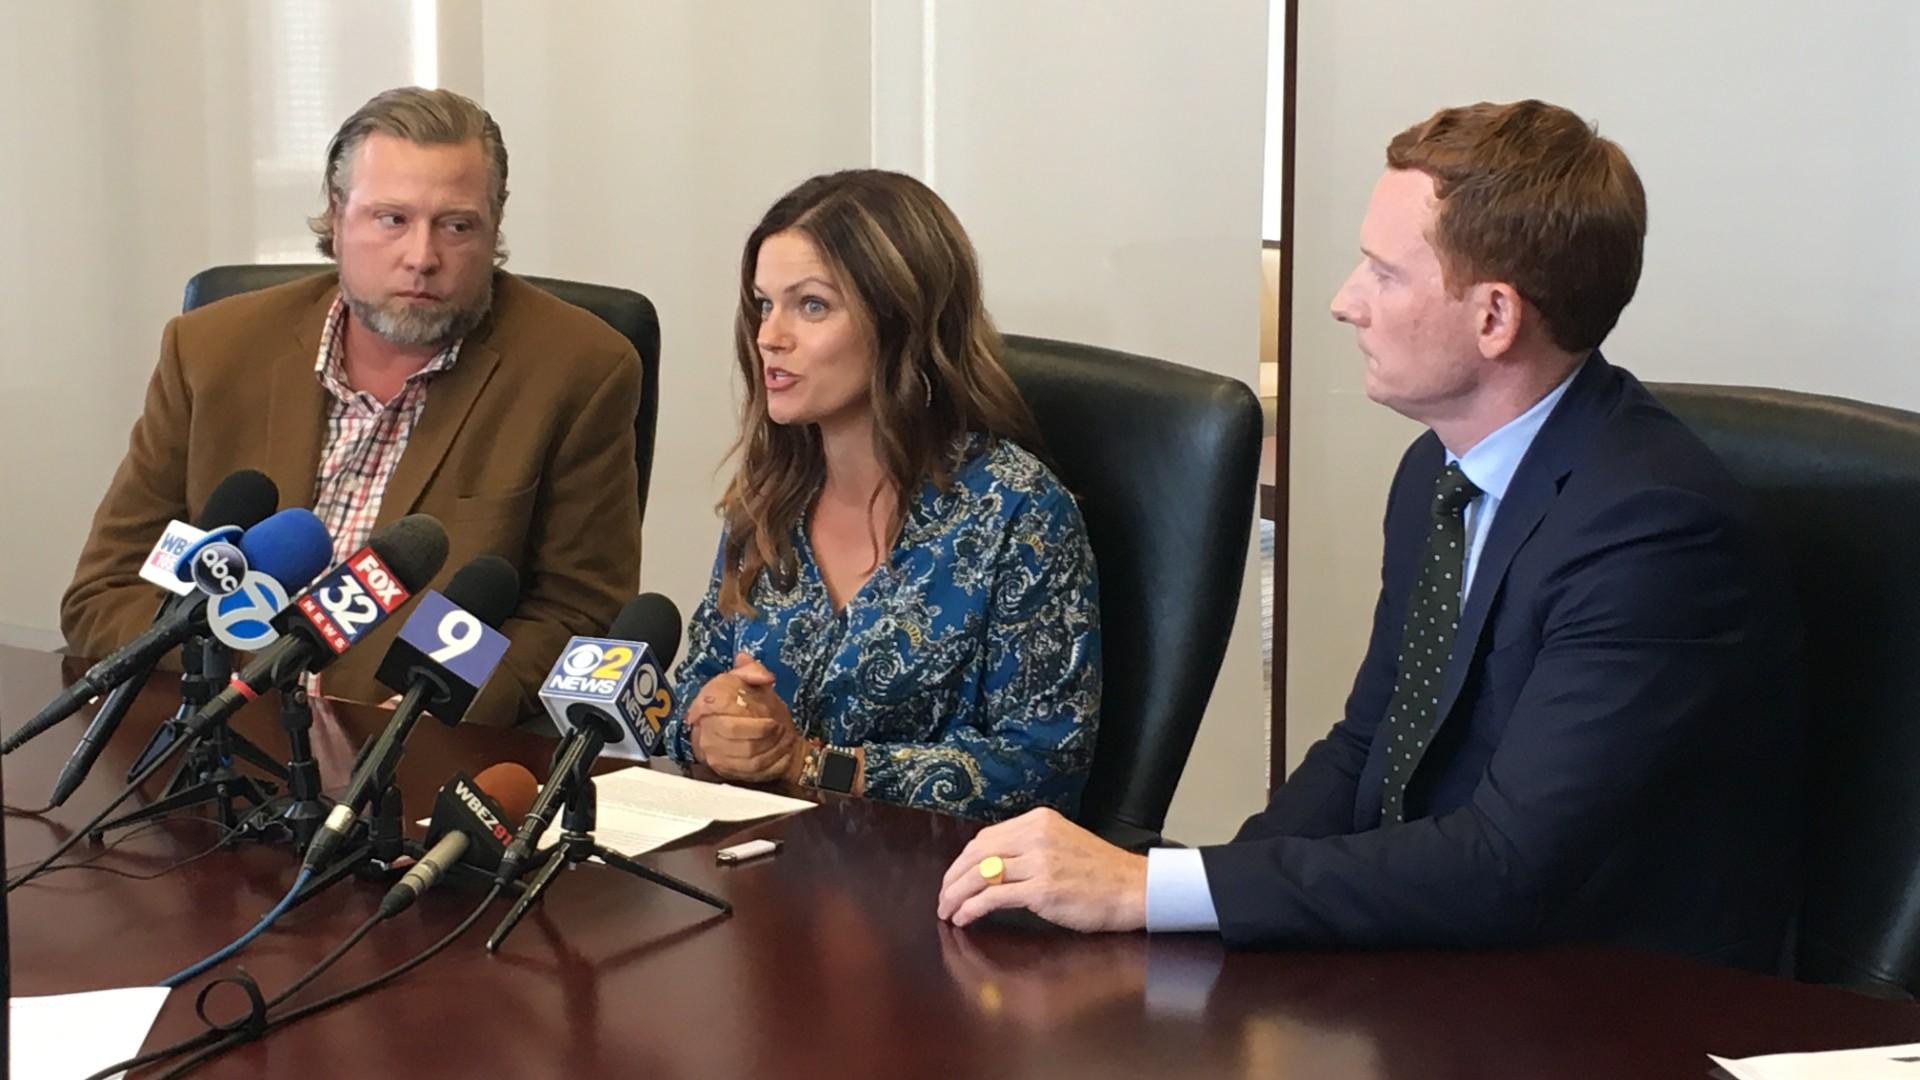 New Lenox residents Tim and Ruby Johnson, left, speak at a press conference Thursday about the recent hospitalization of their daughter, Piper, with their attorney Michael Gallagher, right. (Kristen Thometz / WTTW News)